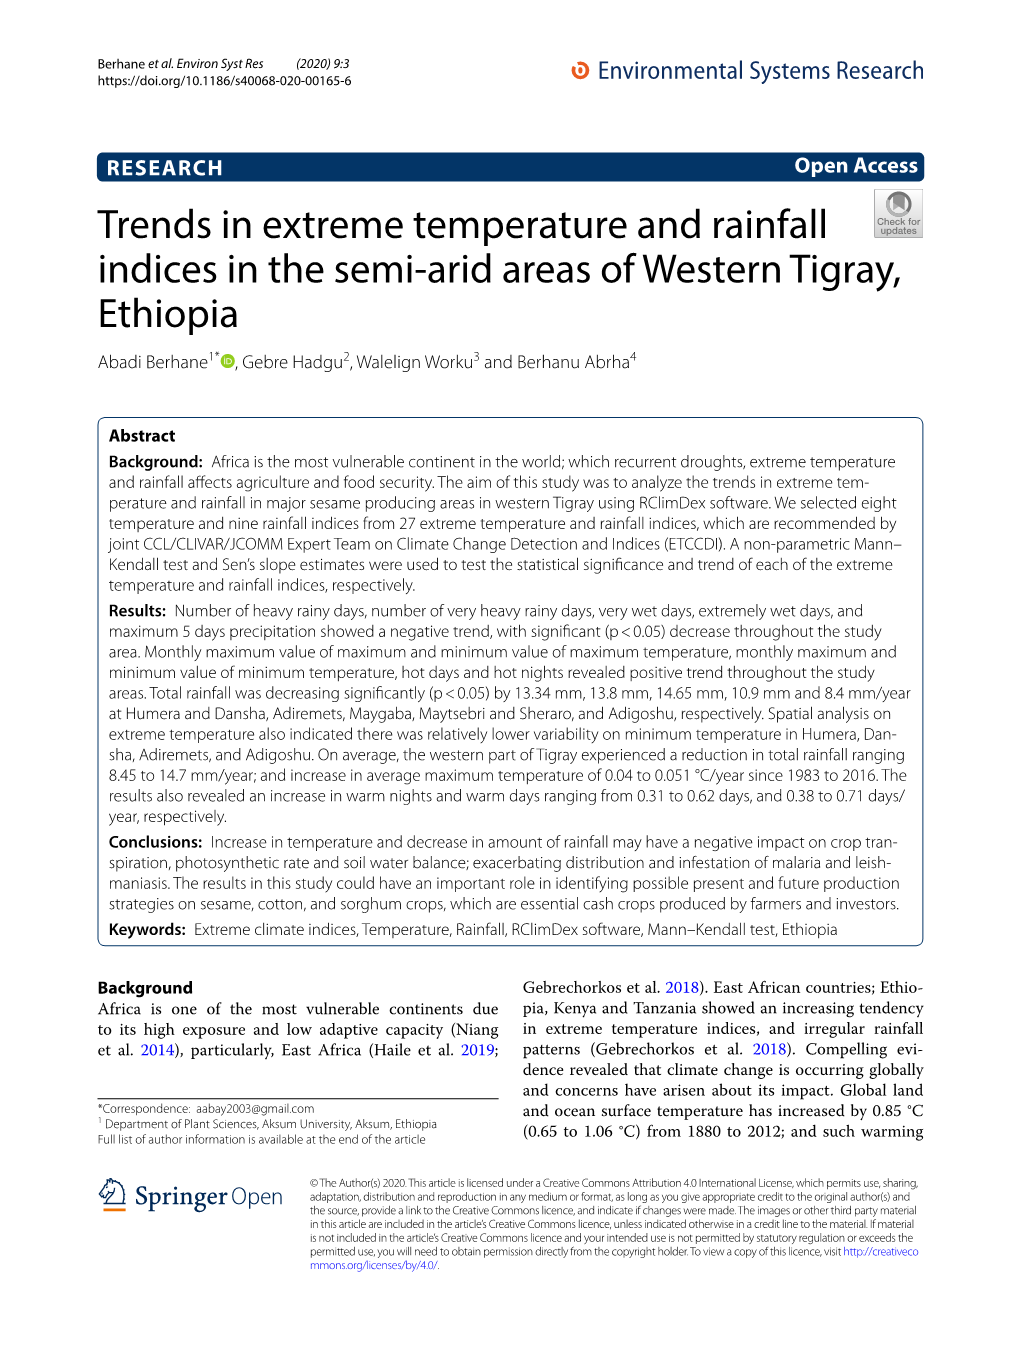 Trends in Extreme Temperature and Rainfall Indices in the Semi-Arid